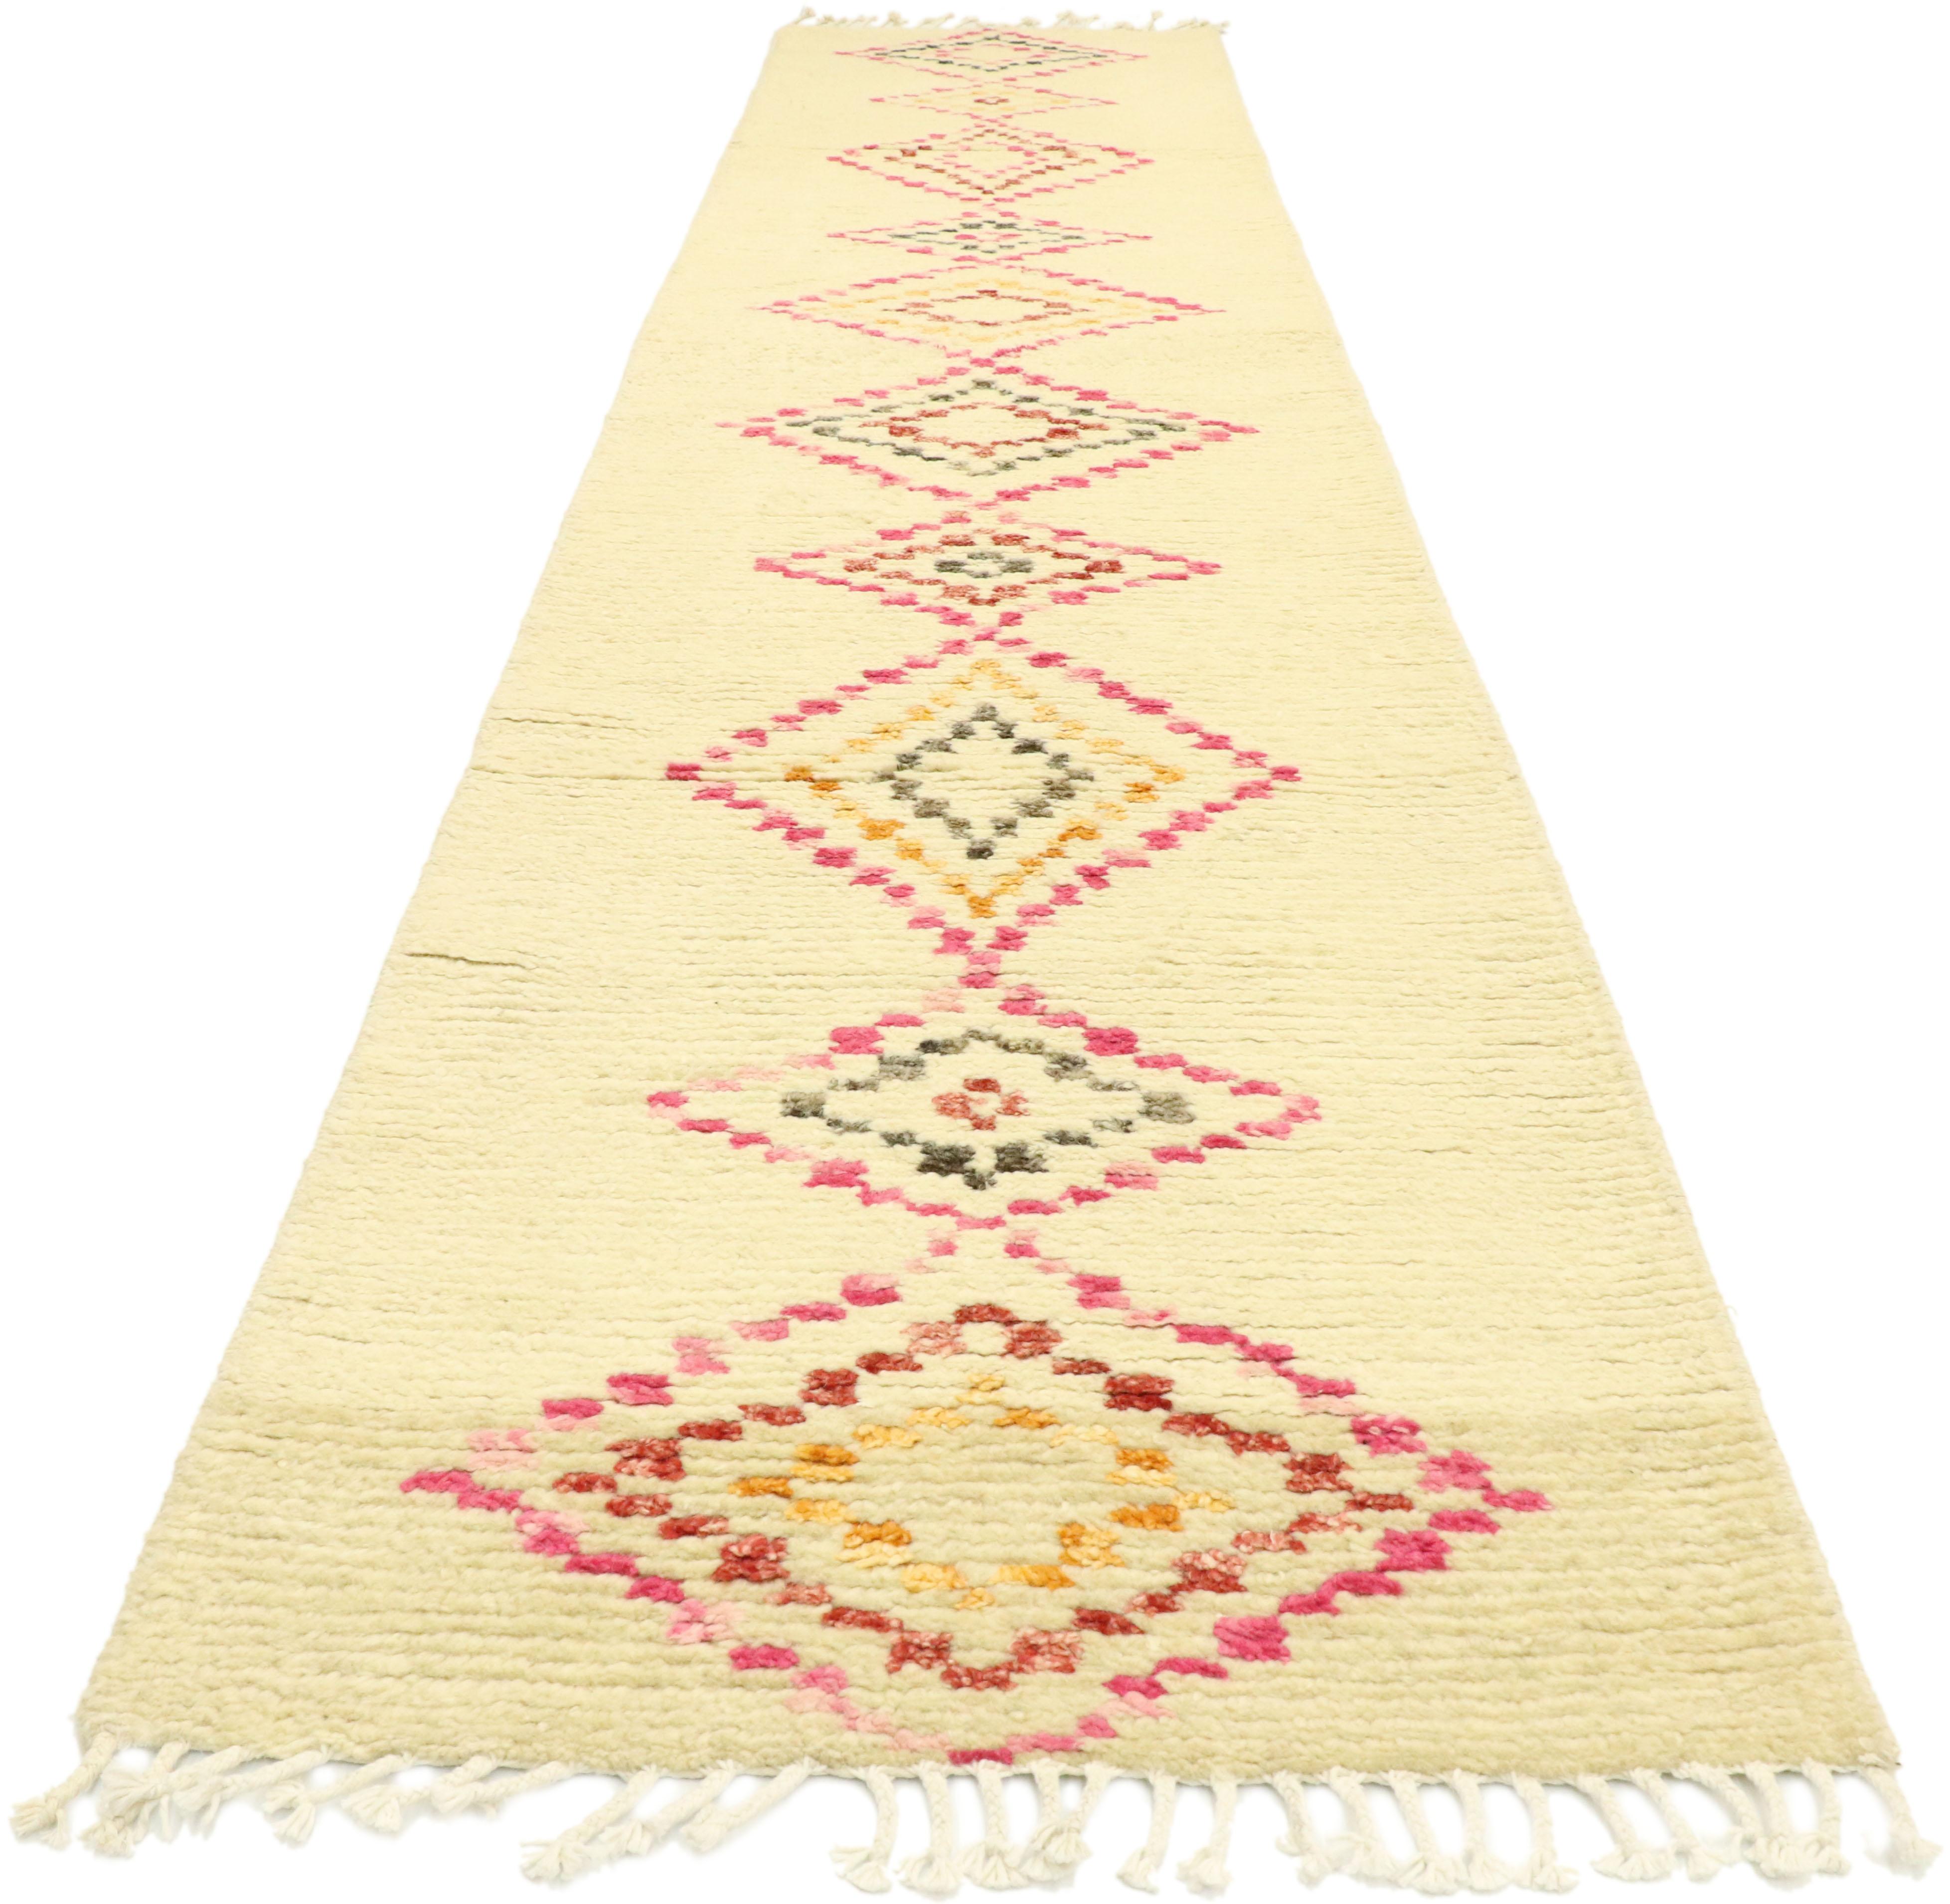 Bohemian Colorful Moroccan Rug Runner, Boho Jungalow meets Southwest Desert Style For Sale